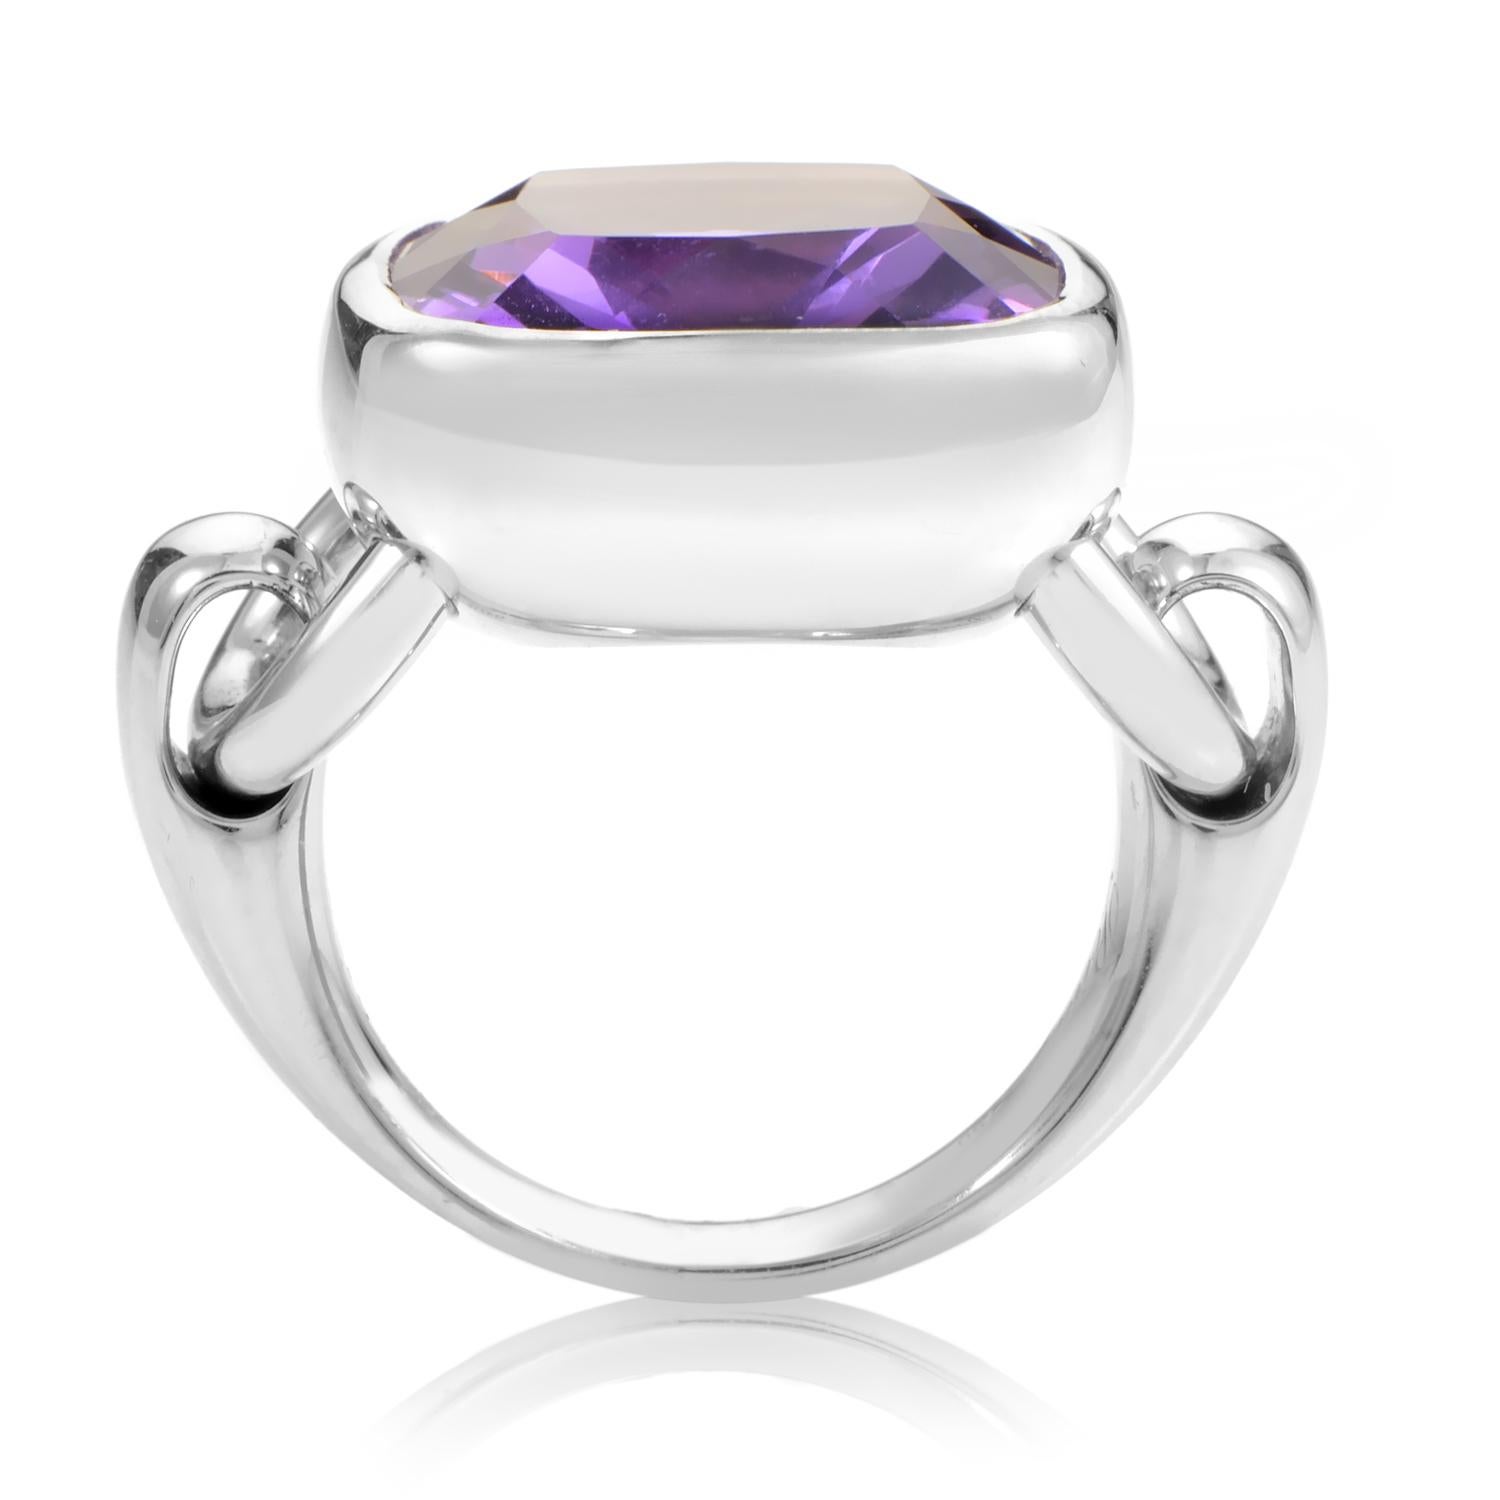 This divine Poiray ring is a pristine example of crisp class. The ring is made of 18K white gold that is specially designed with hinges for a smooth, movable, cushion shaped bezel setting. A faceted amethyst totaling ~8.35ct is beautifully